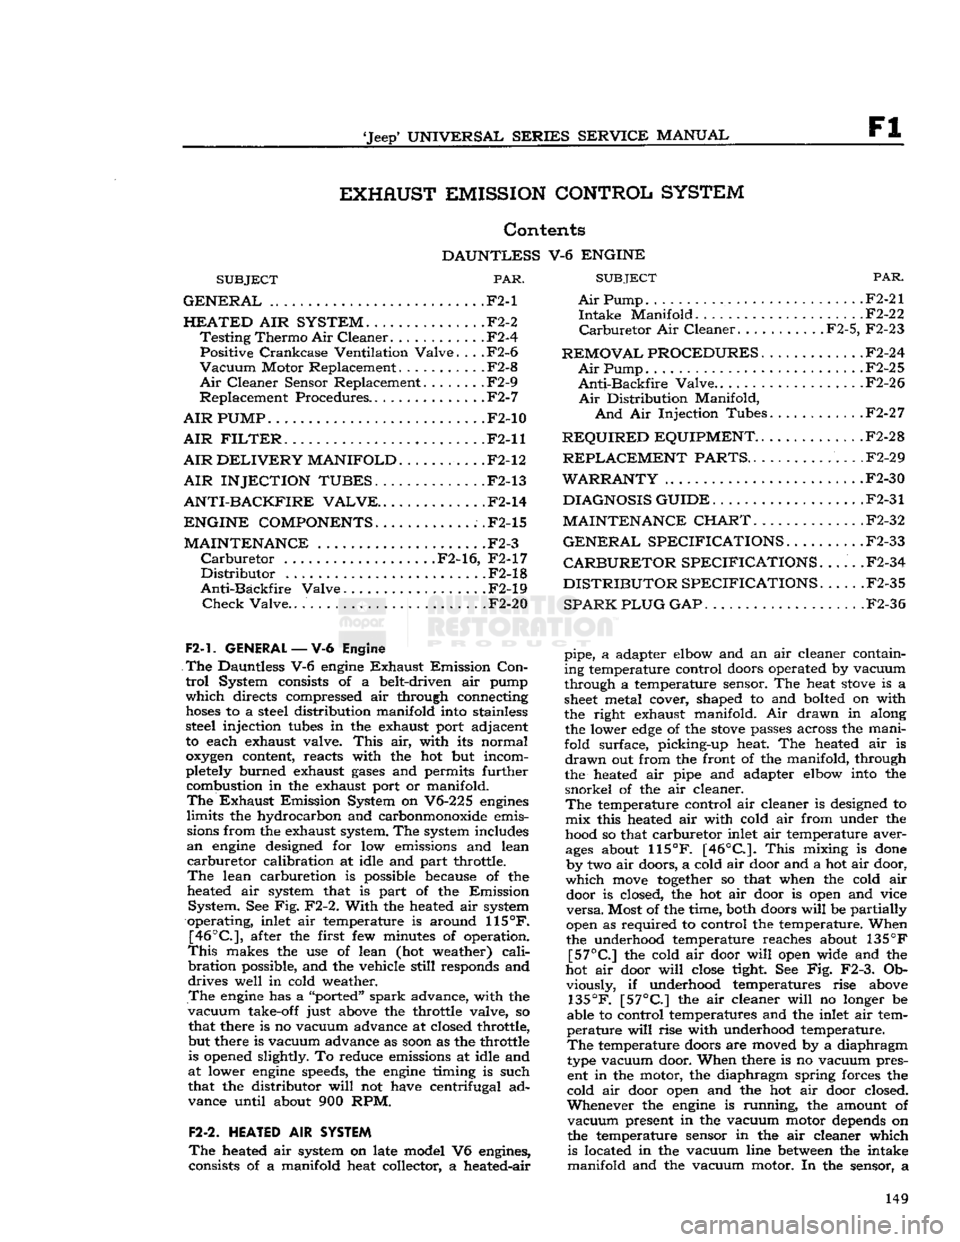 JEEP CJ 1953  Service Manual 
Jeep
 UNIVERSAL SERIES SERVICE
 MANUAL 

Fl 
EXHAUST
 EMISSION
 CONTROL
 SYSTEM 

Contents 

DAUNTLESS
 V-6
 ENGINE 
SUBJECT
 PAR. 

GENERAL
 .F2-1 
 HEATED
 AIR
 SYSTEM.
 . F2-2 
 Testing
 Thermo
